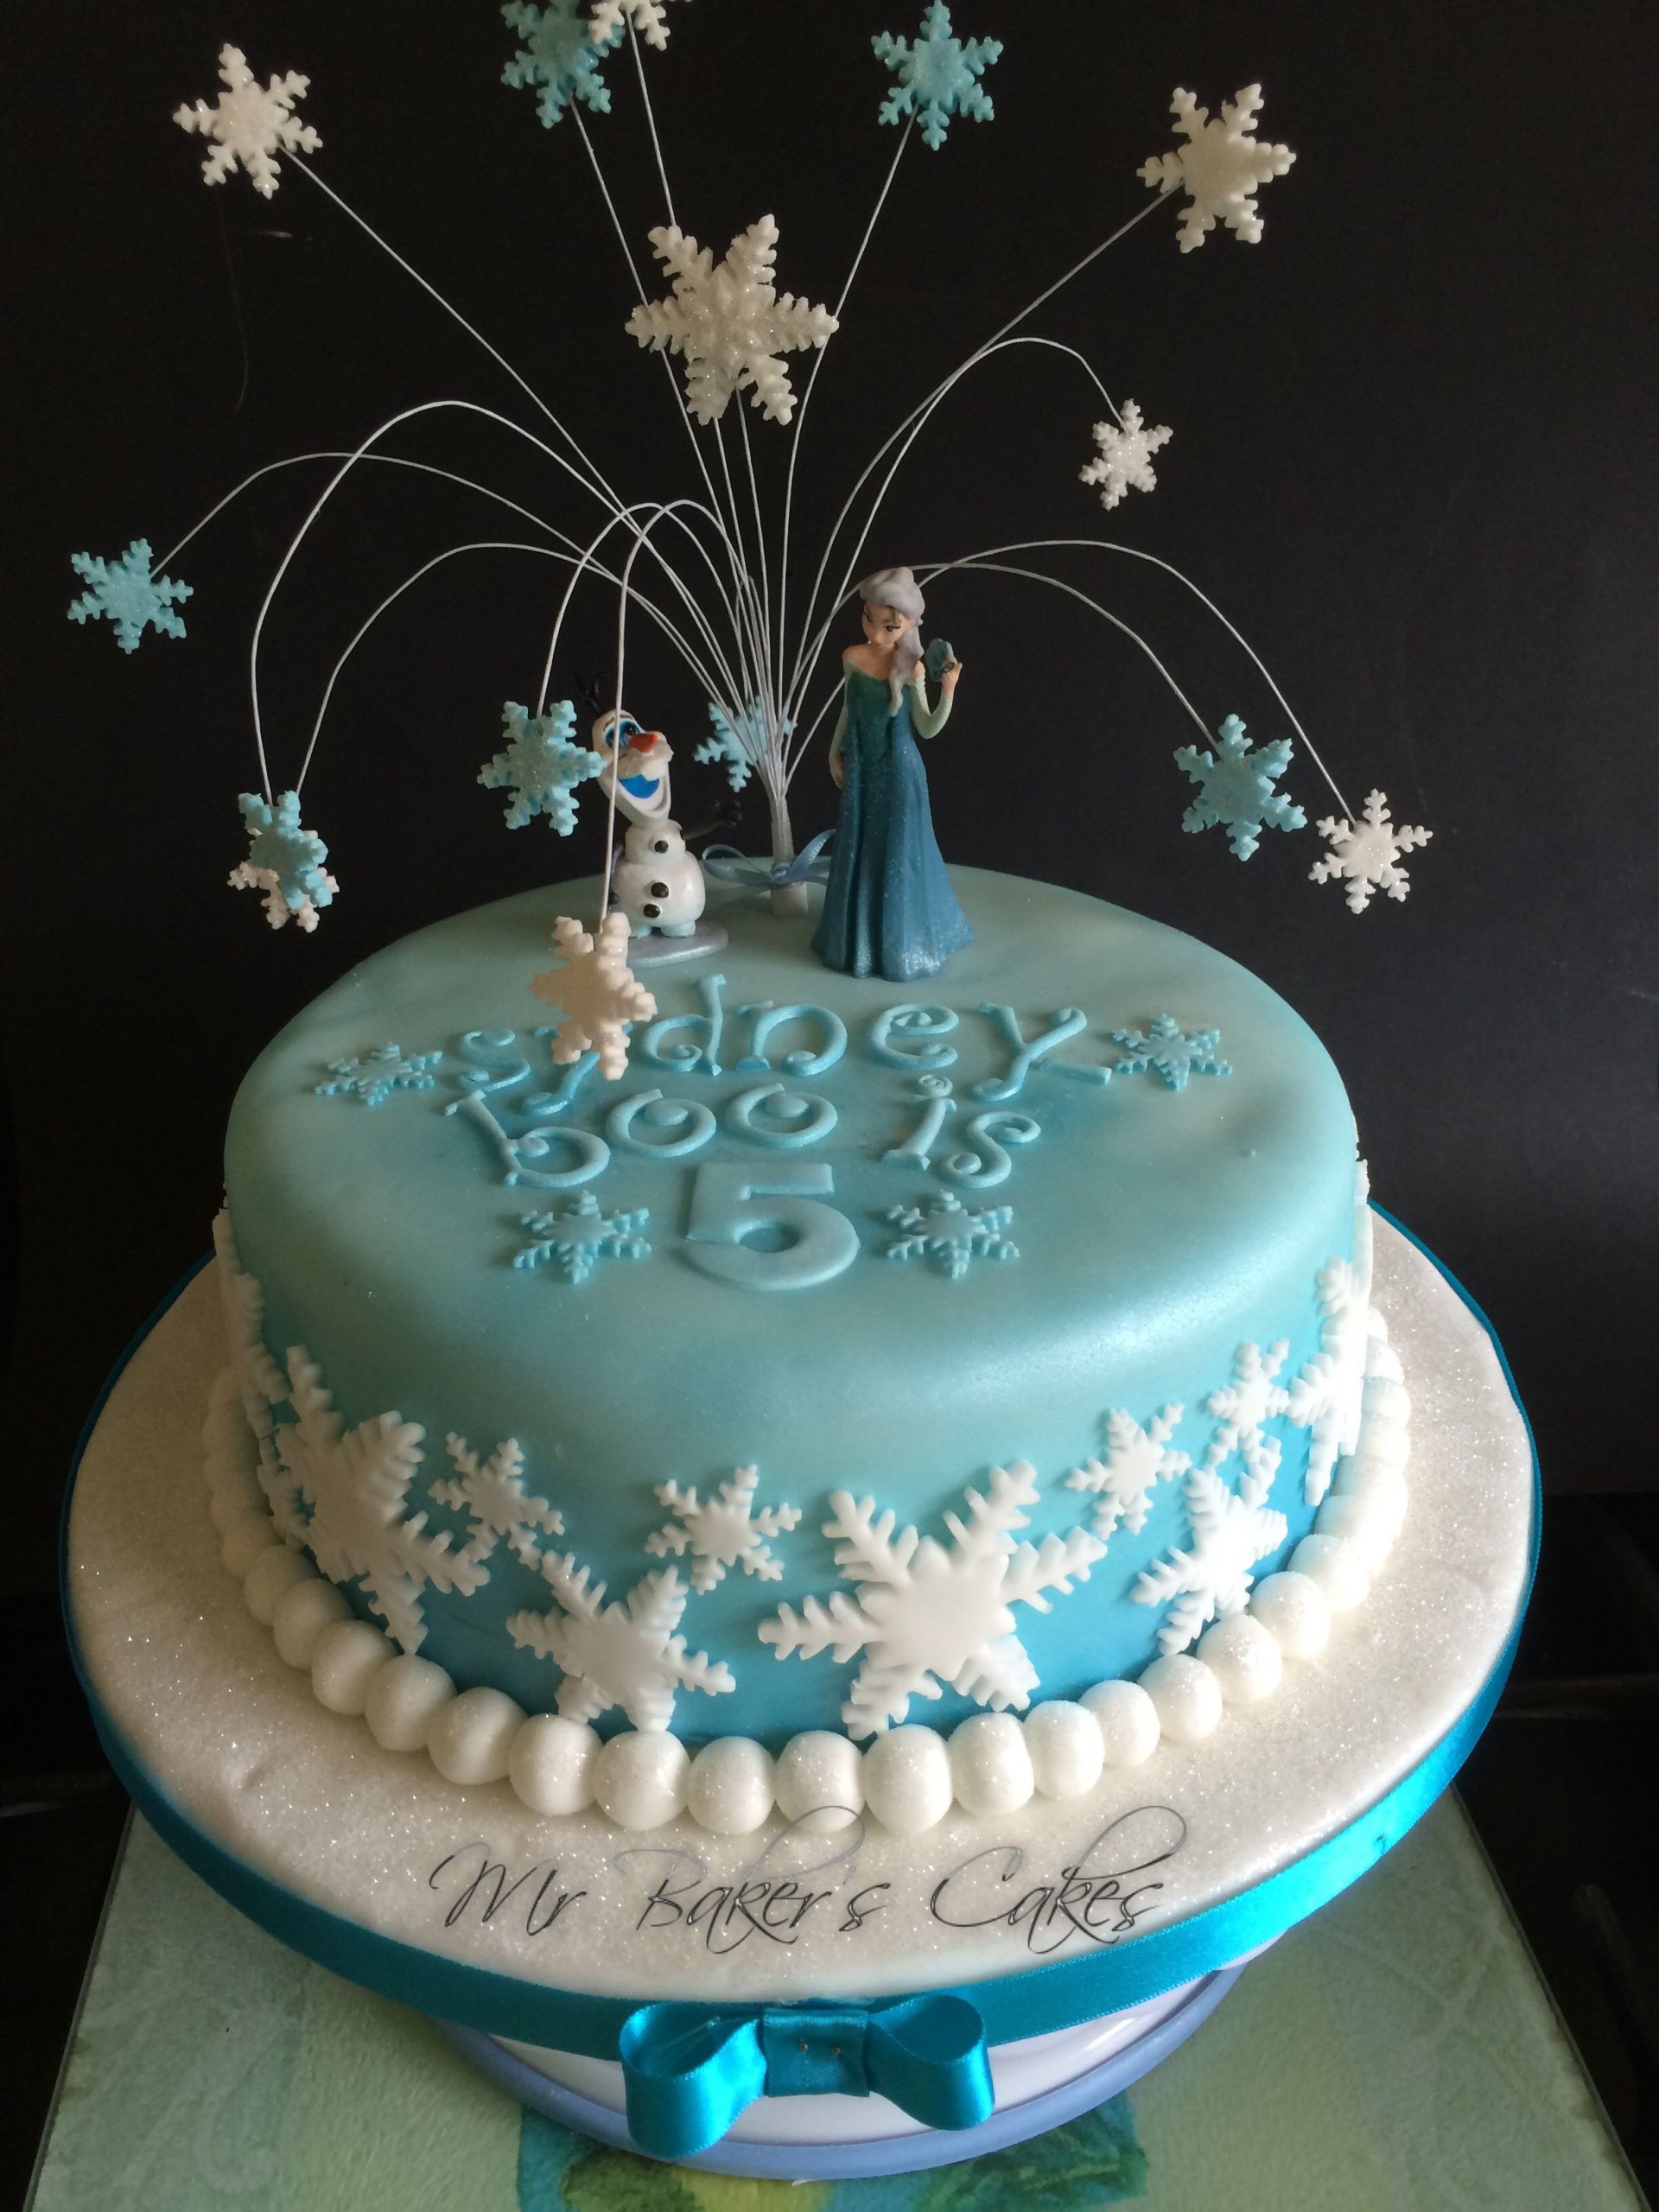 Frozen Themed Birthday Cake
 Frozen single tier cake With images